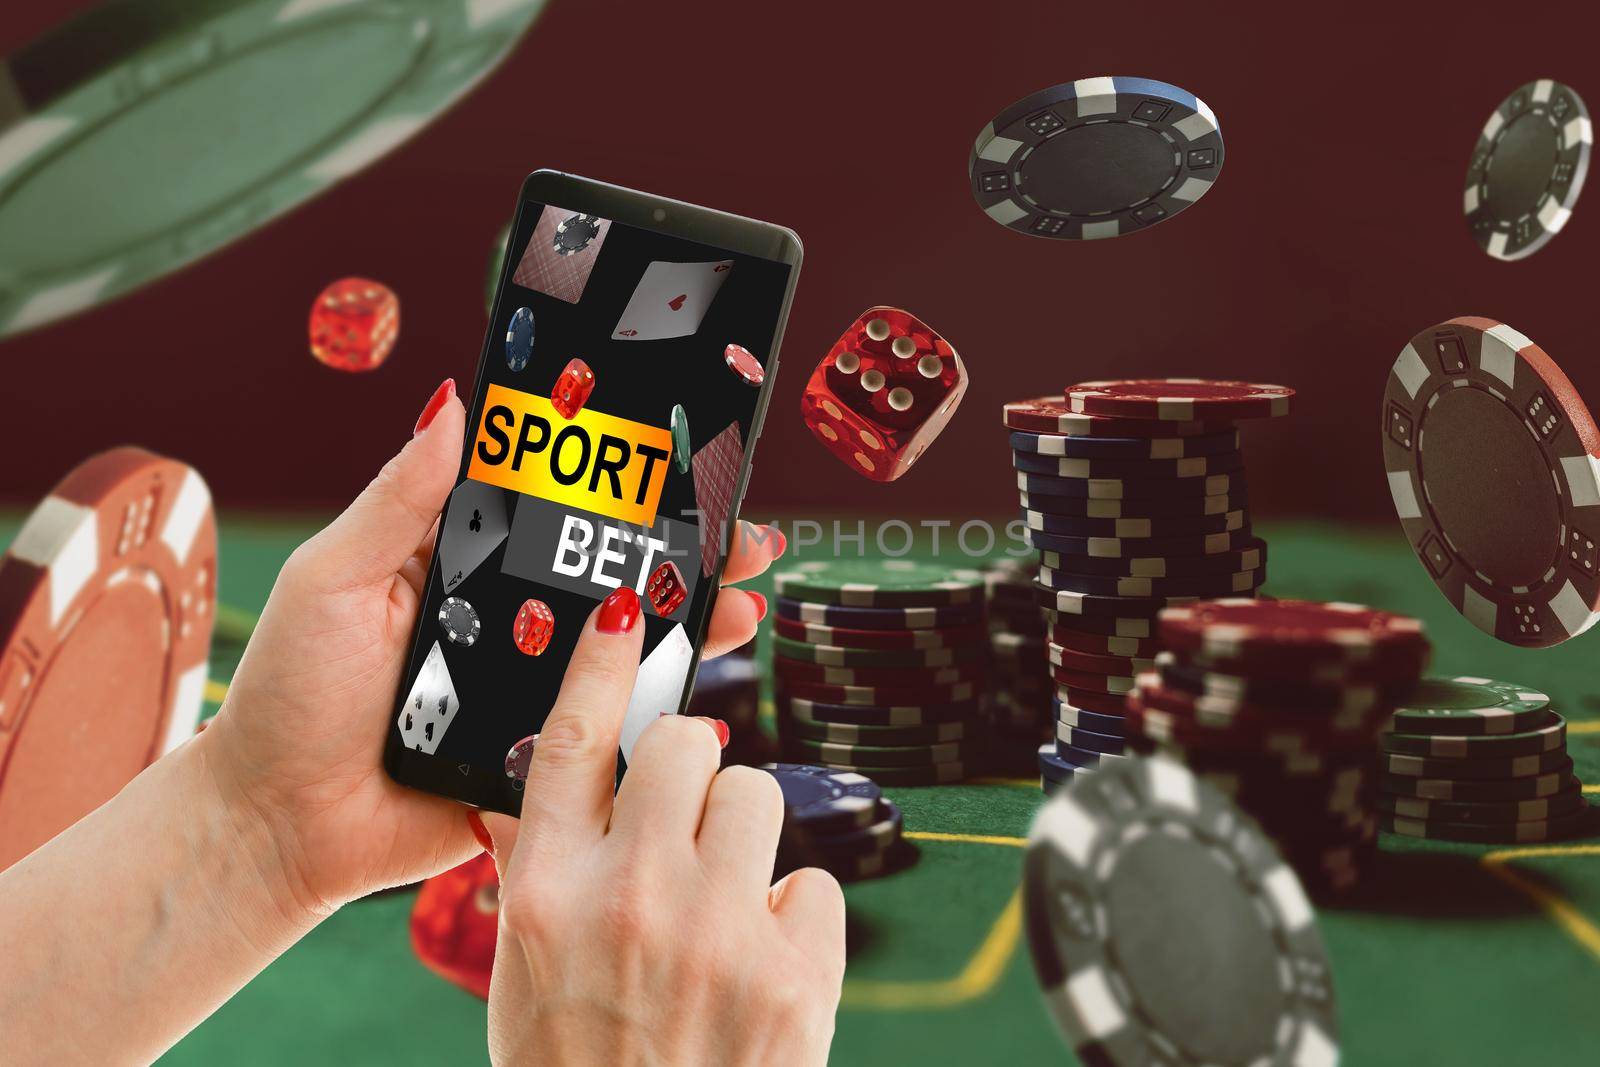 inscription your bet wins on a smartphone on the poker table. Bets, sports betting, bookmaker. Mixed media